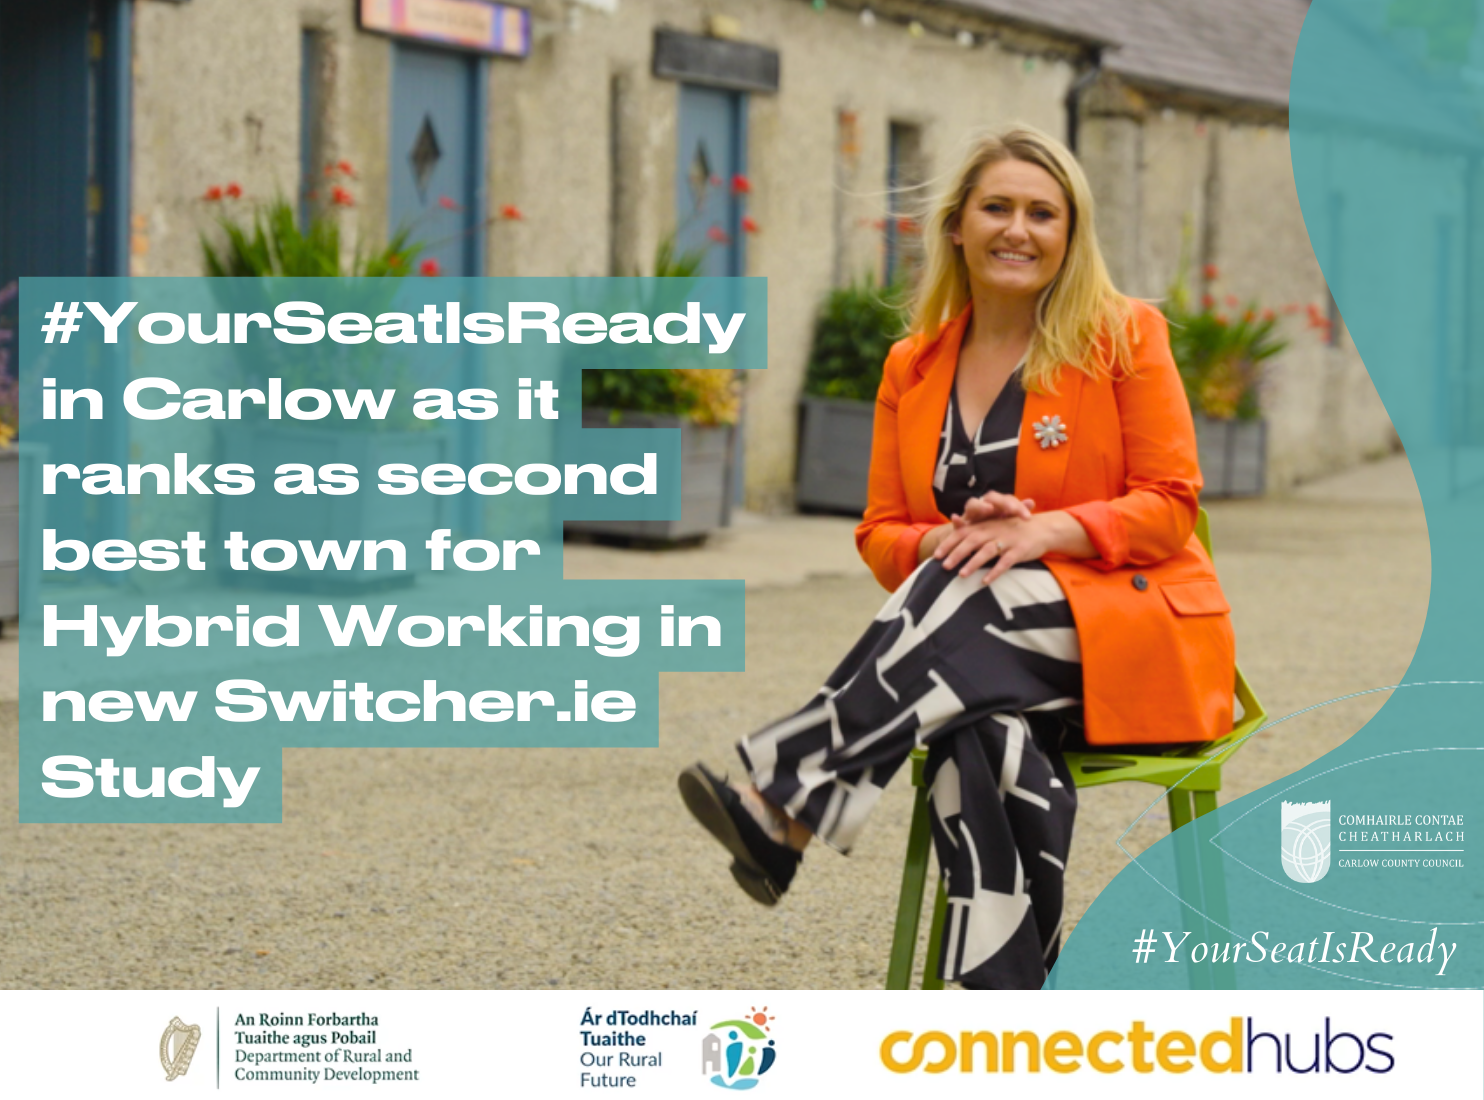 #YourSeatIsReady in Carlow as it ranks as second best town for Hybrid Working in new Switcher.ie Study. 